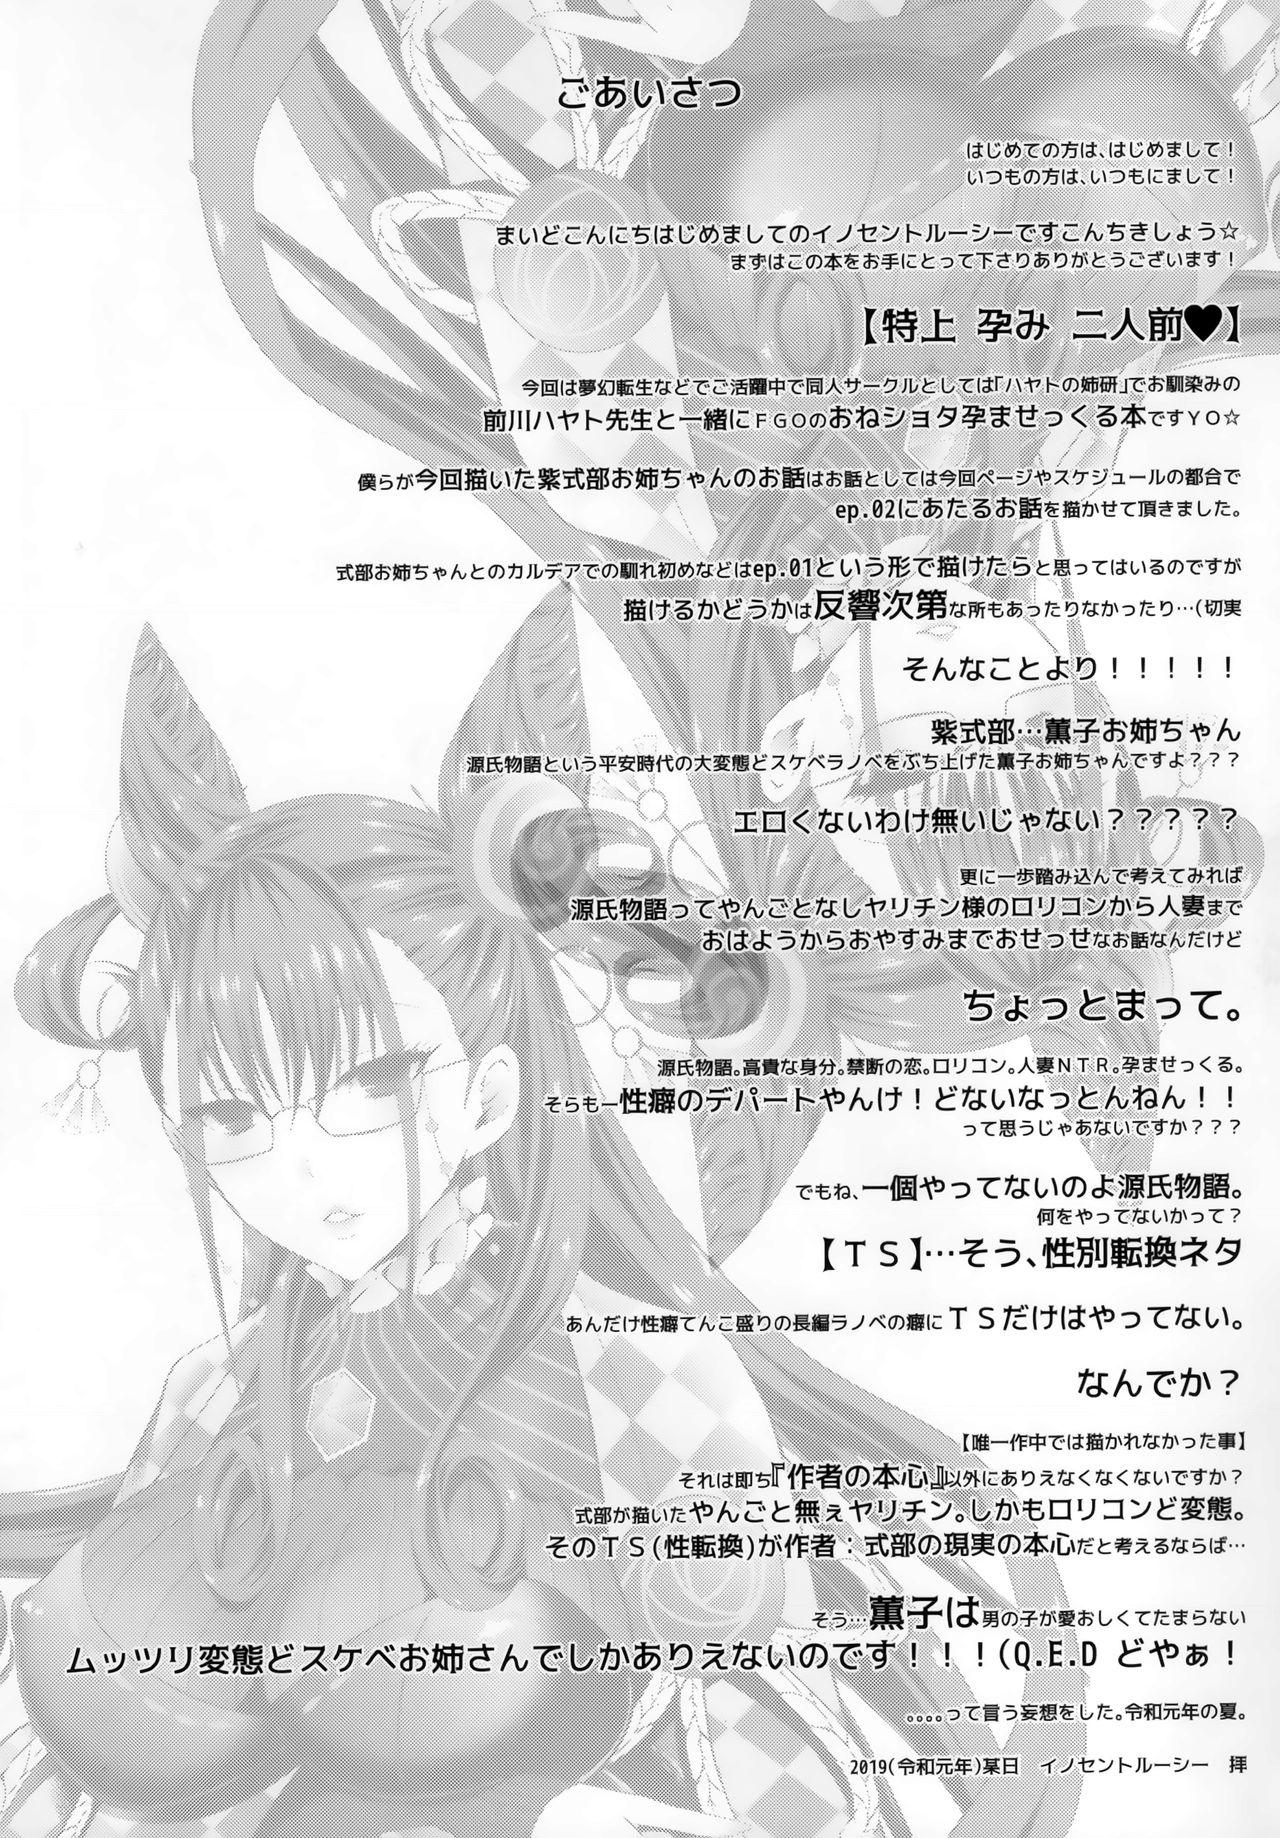 Tiny Girl 特上孕み二人前 - Fate grand order Family Taboo - Page 12